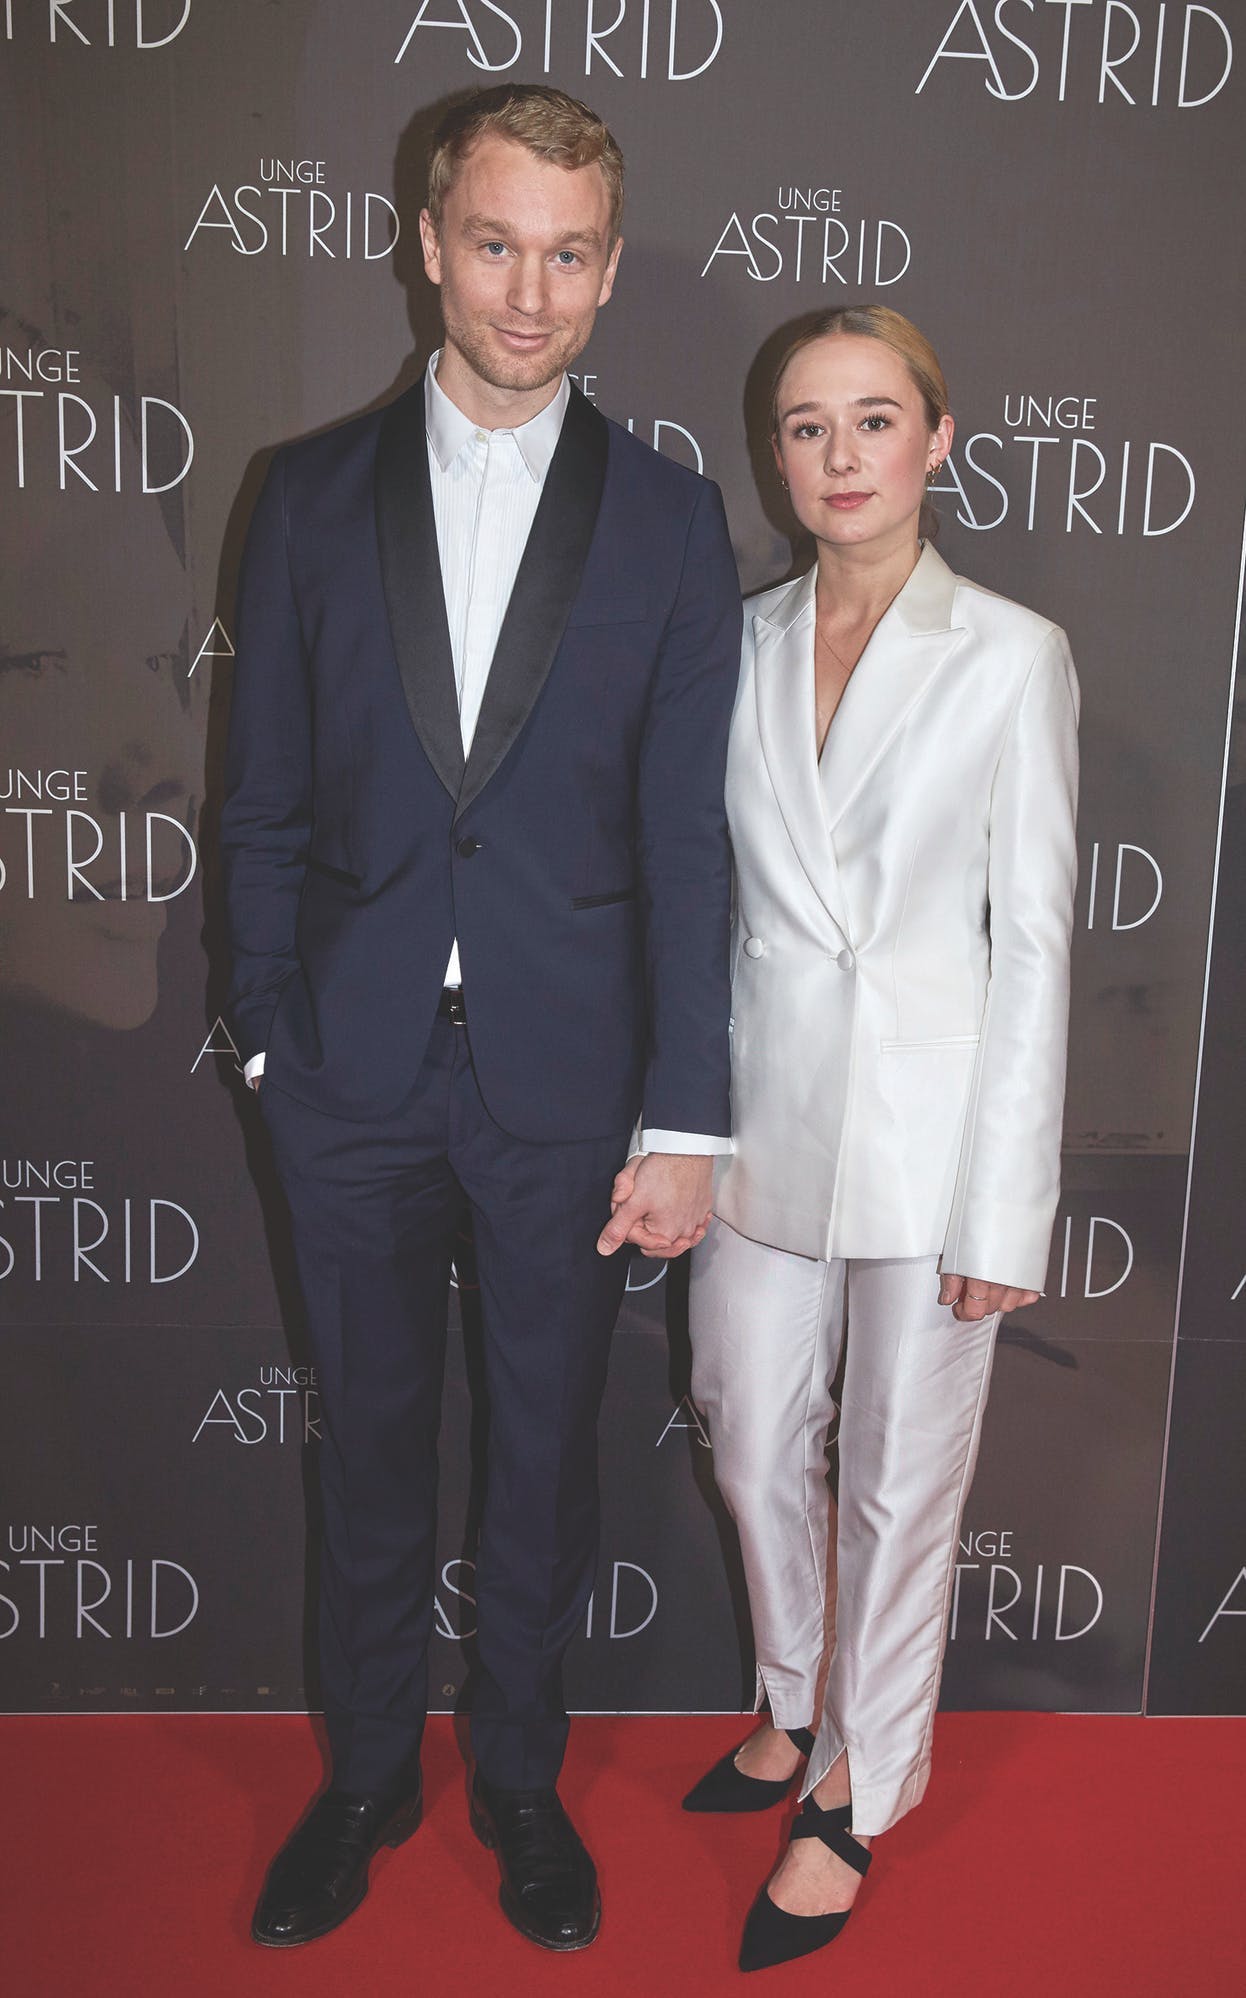 Alba August and Björn Gustafsson at the premiere of 'Beyond Astrid' holding hands with each other, both wearing pant suit. He wears blue and she wears white with black heels